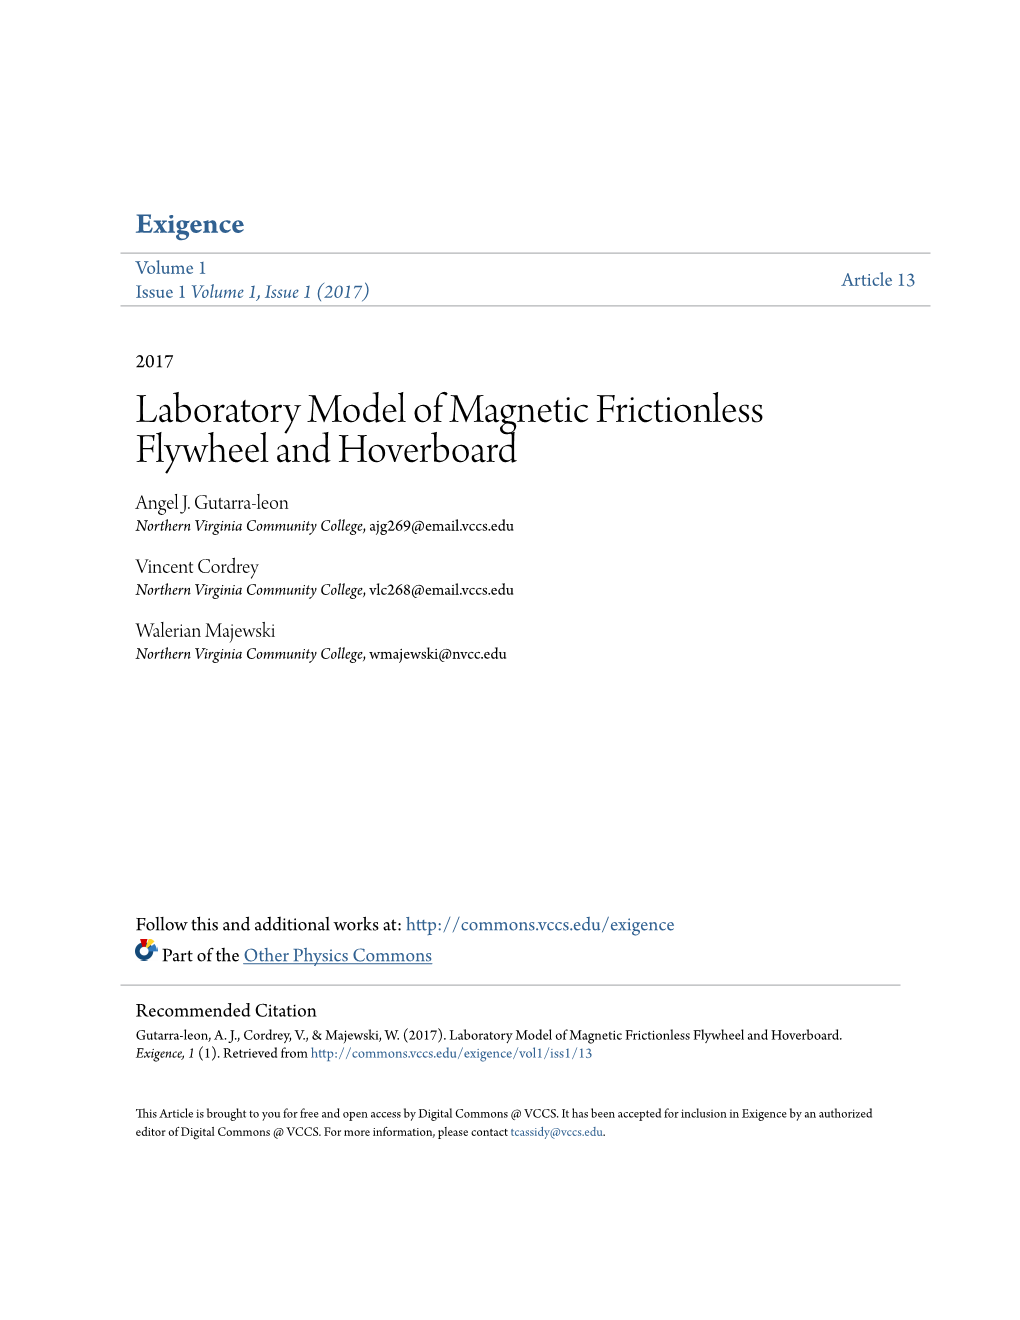 Laboratory Model of Magnetic Frictionless Flywheel and Hoverboard Angel J